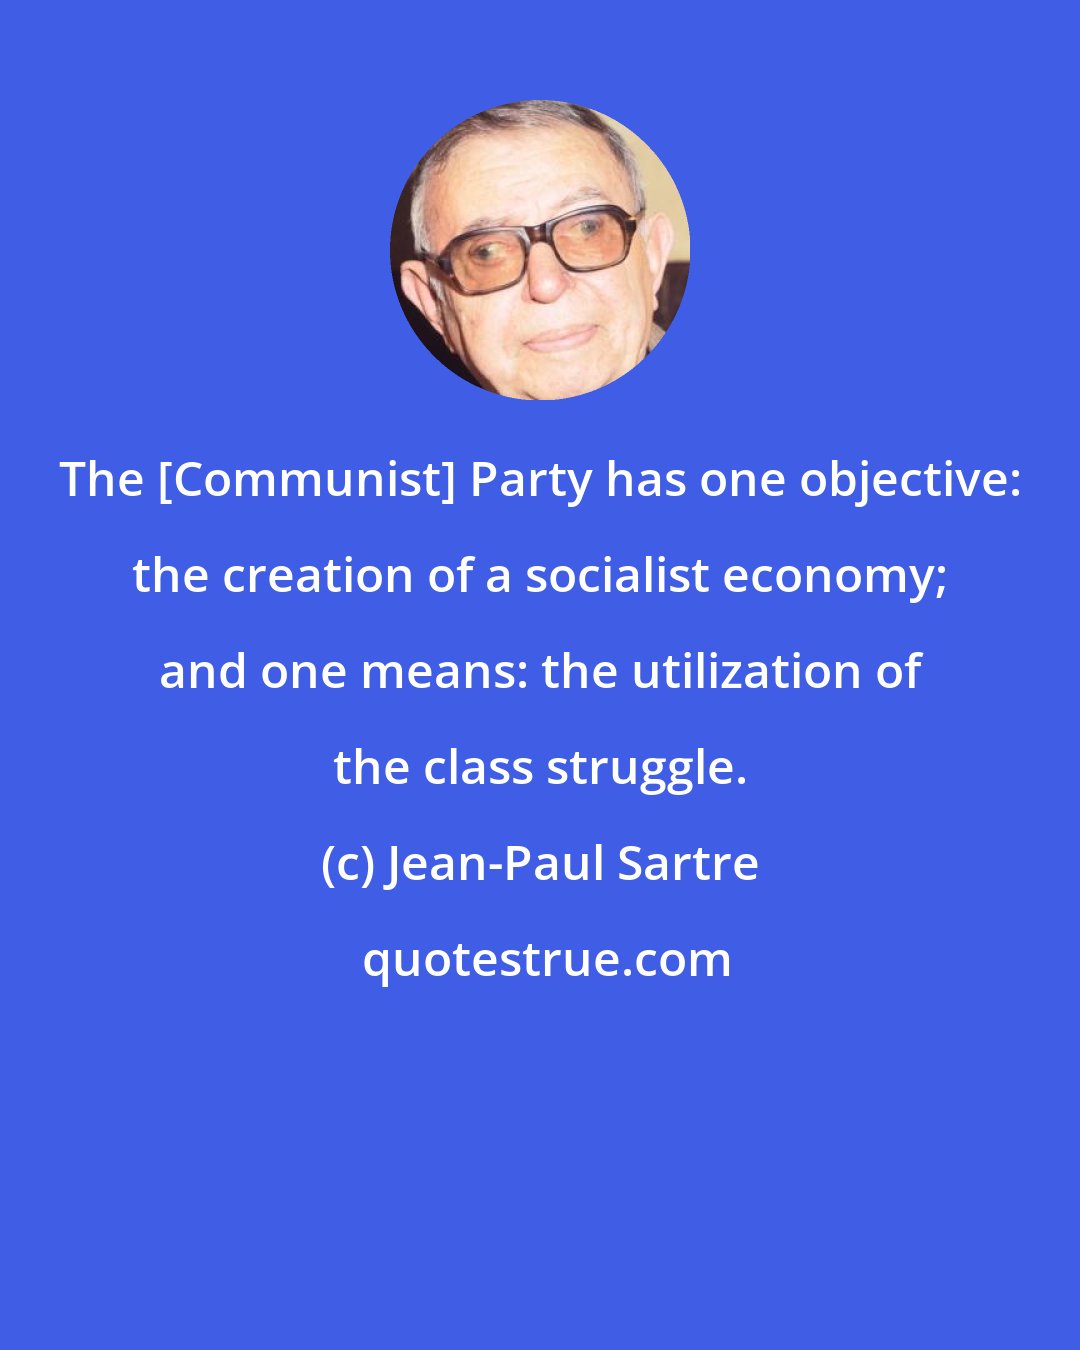 Jean-Paul Sartre: The [Communist] Party has one objective: the creation of a socialist economy; and one means: the utilization of the class struggle.